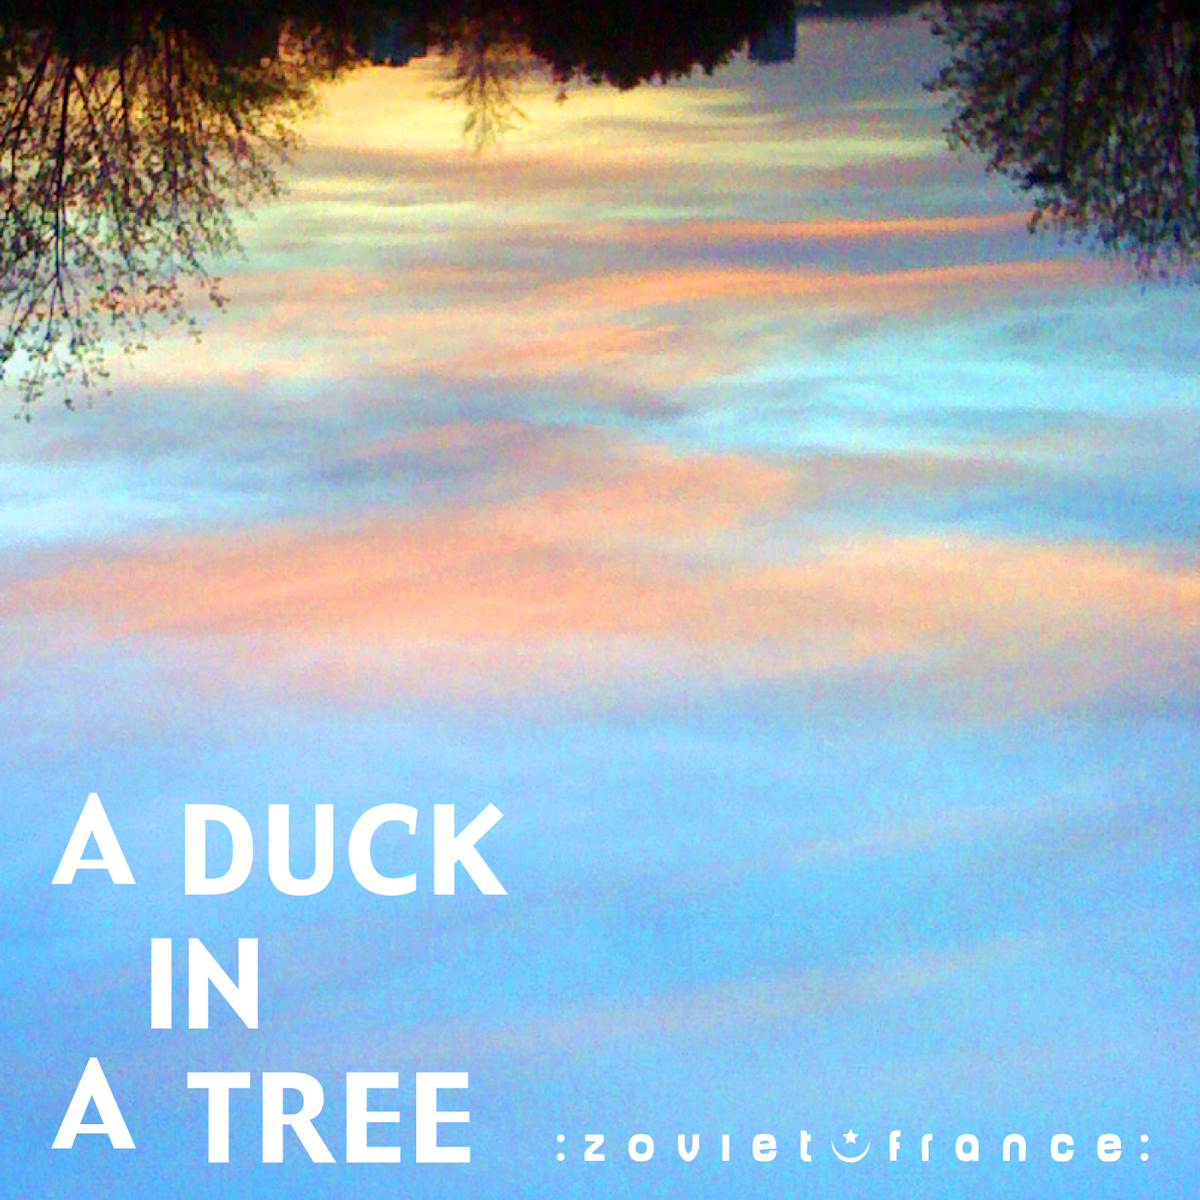 A-Duck-in-a-Tree-2012-12-29-_-To-the-Other-Side-Through-the-Eye-of-Tomorrow-layout-1200.jpg